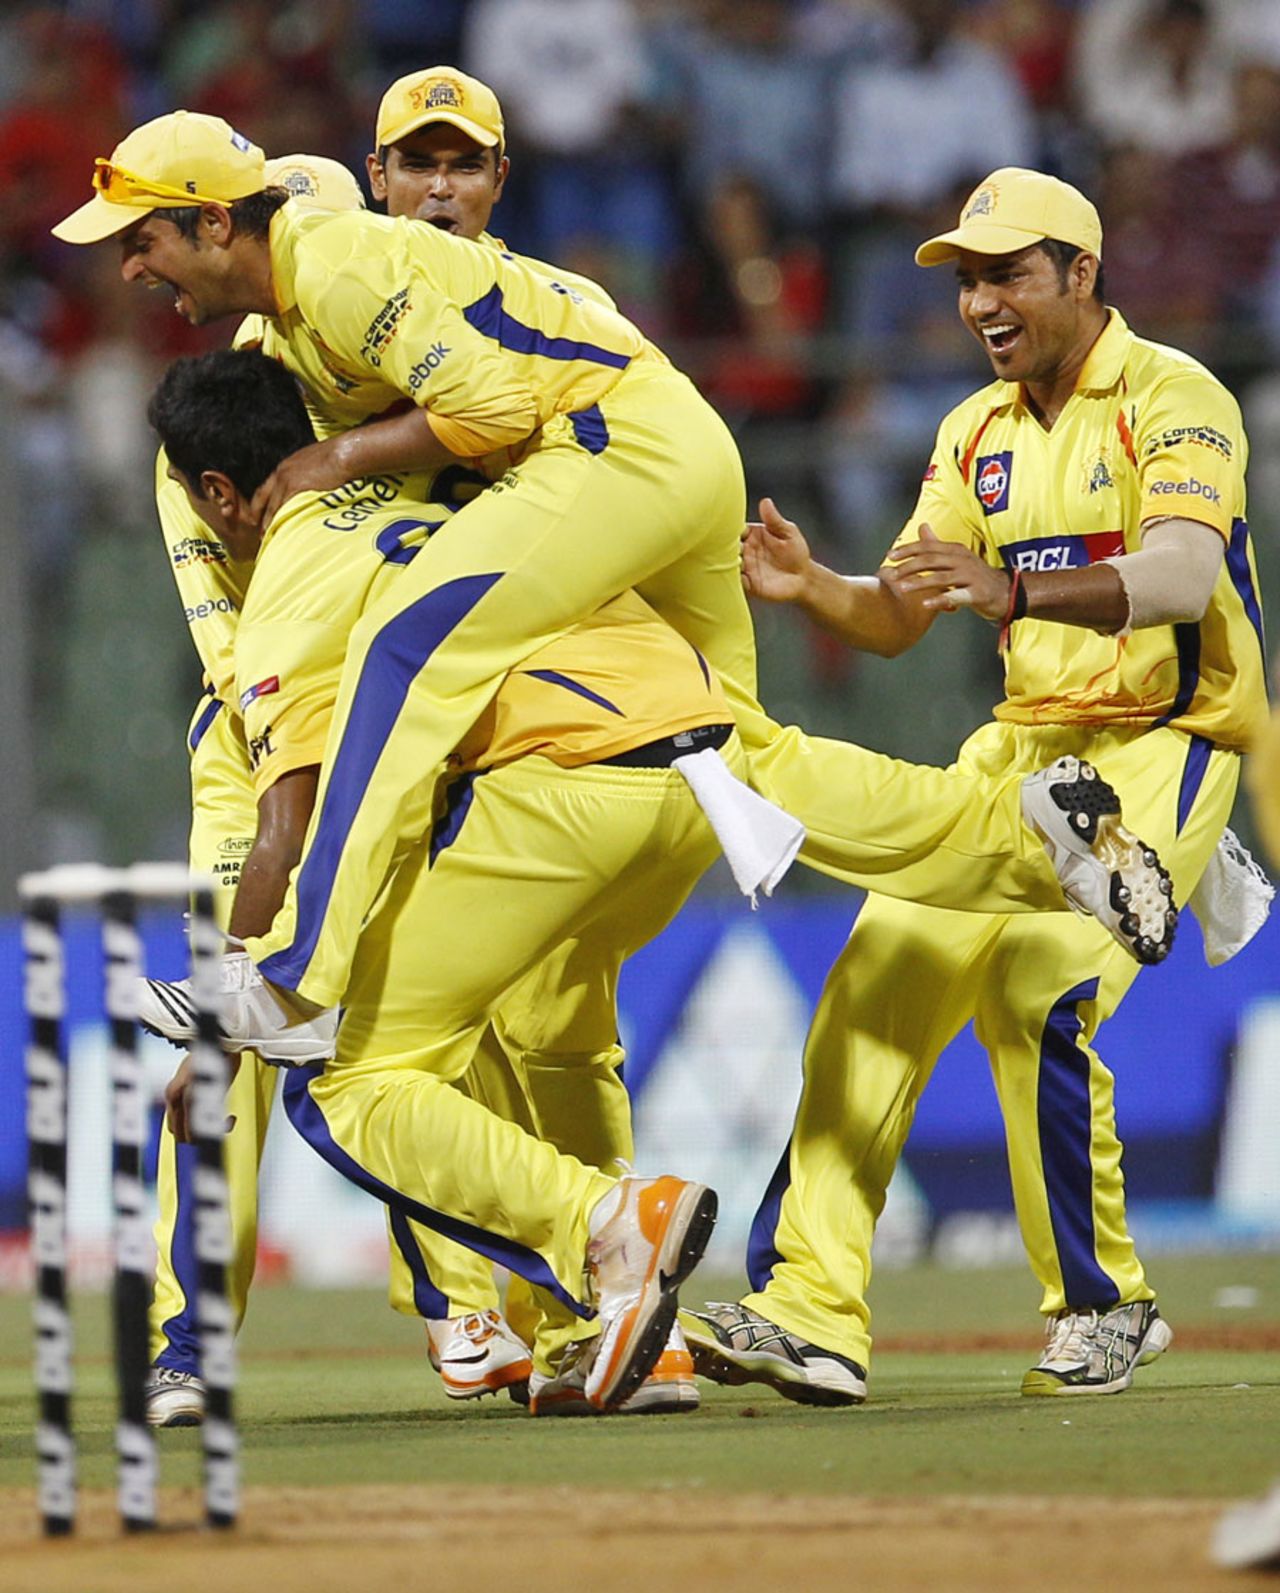 R Ashwin is mobbed by his team-mates after getting Chris Gayle, Bangalore v Chennai, 1st qualifier, IPL 2011, Mumbai, May 24, 2011